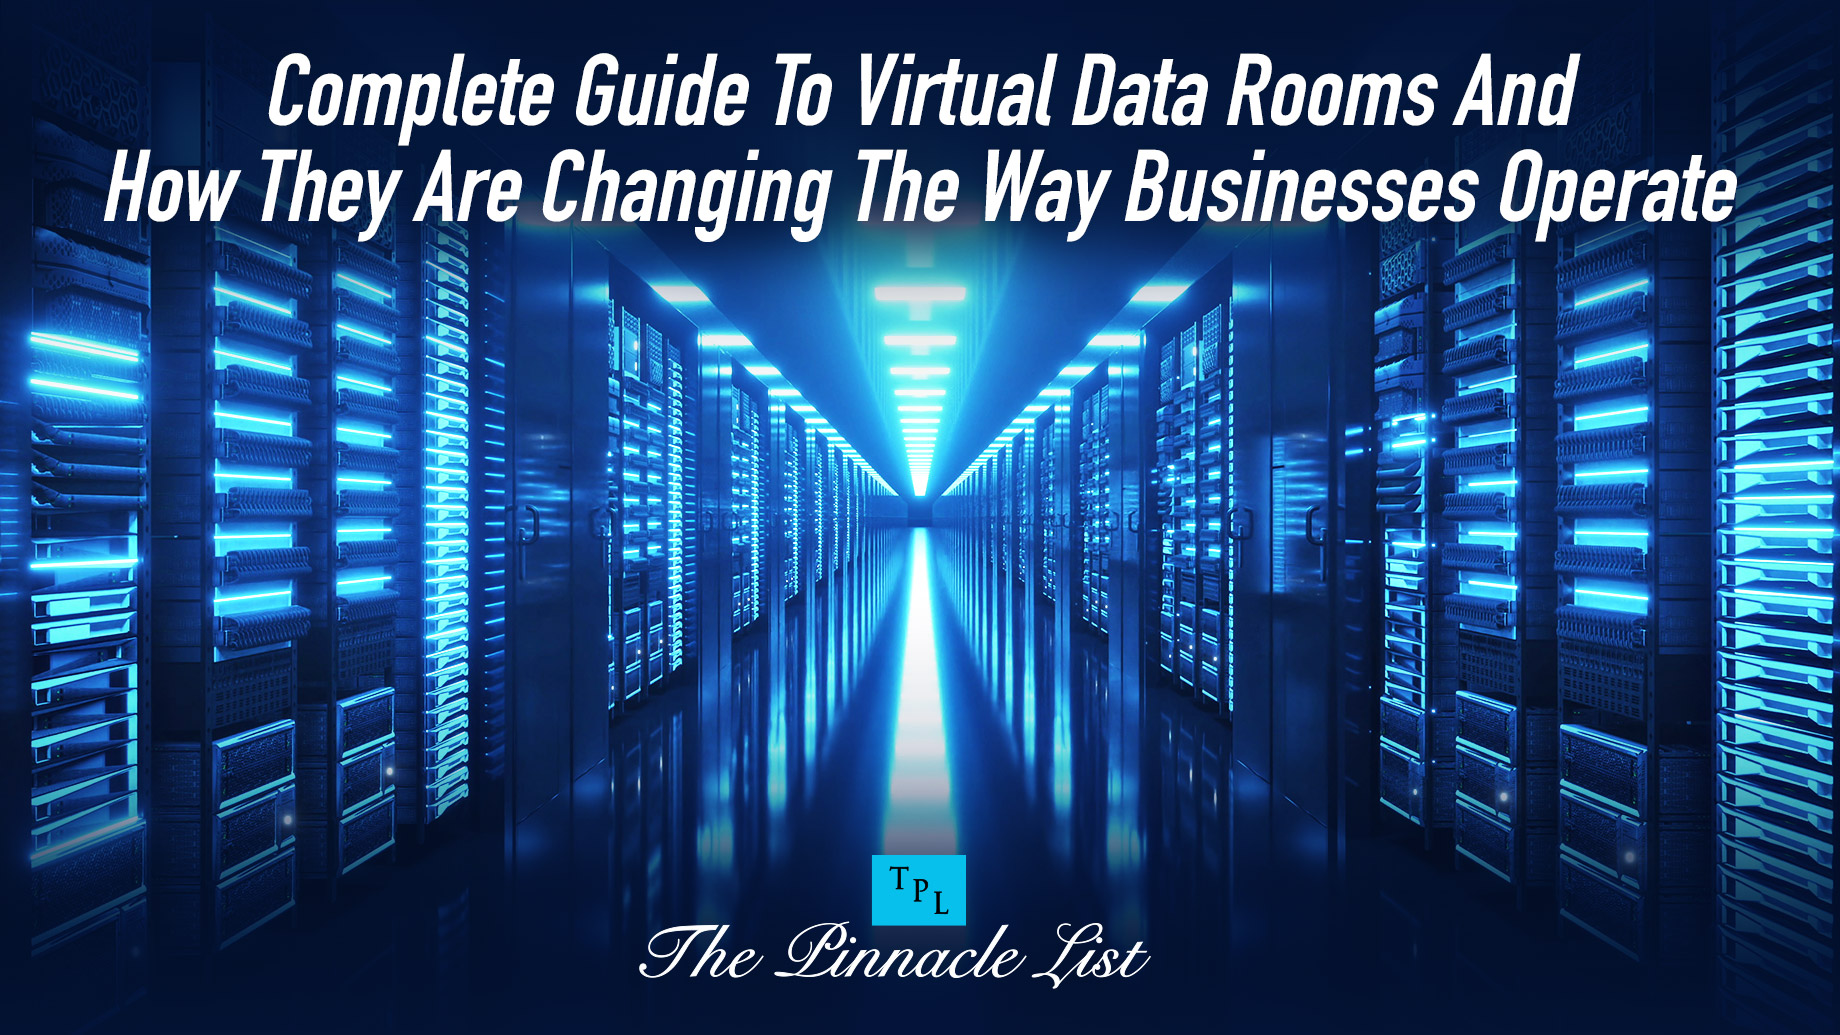 Complete Guide To Virtual Data Rooms And How They Are Changing The Way Businesses Operate